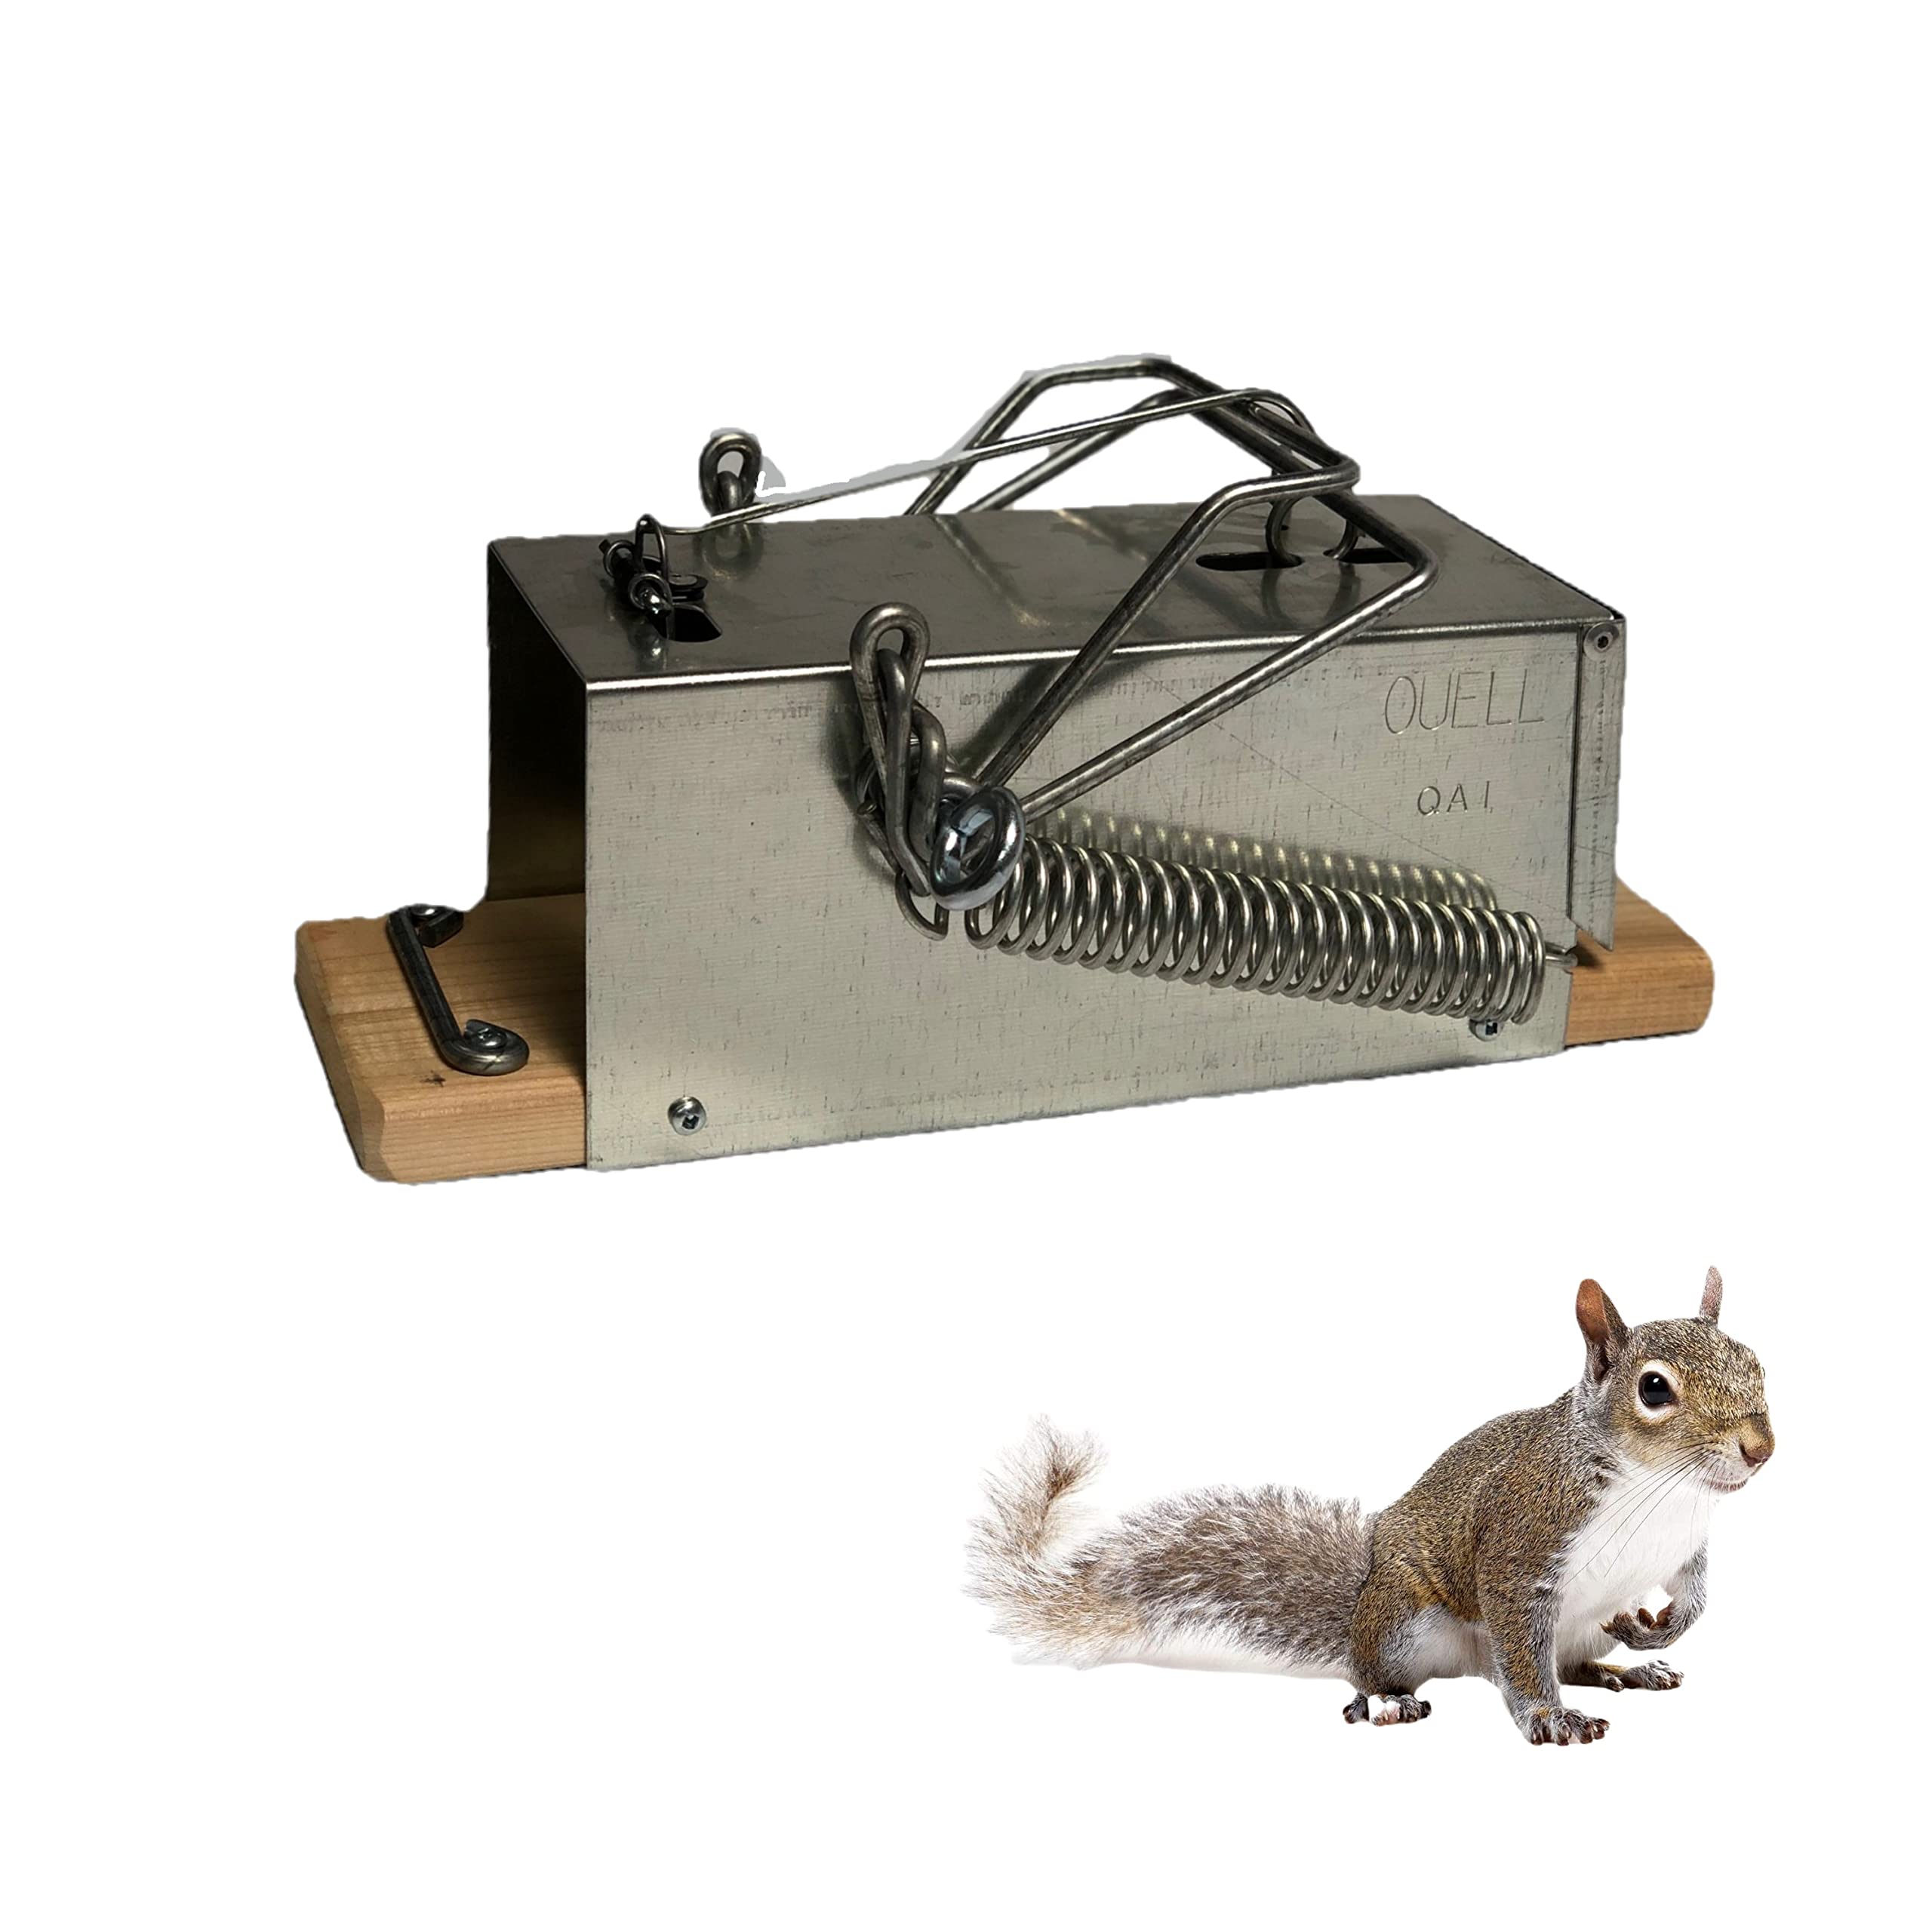 Pieges Ouell Traps Squirrel Traps Outdoor - Squirrel Traps - Ouell Traps - Trap For Squirrels (Big)